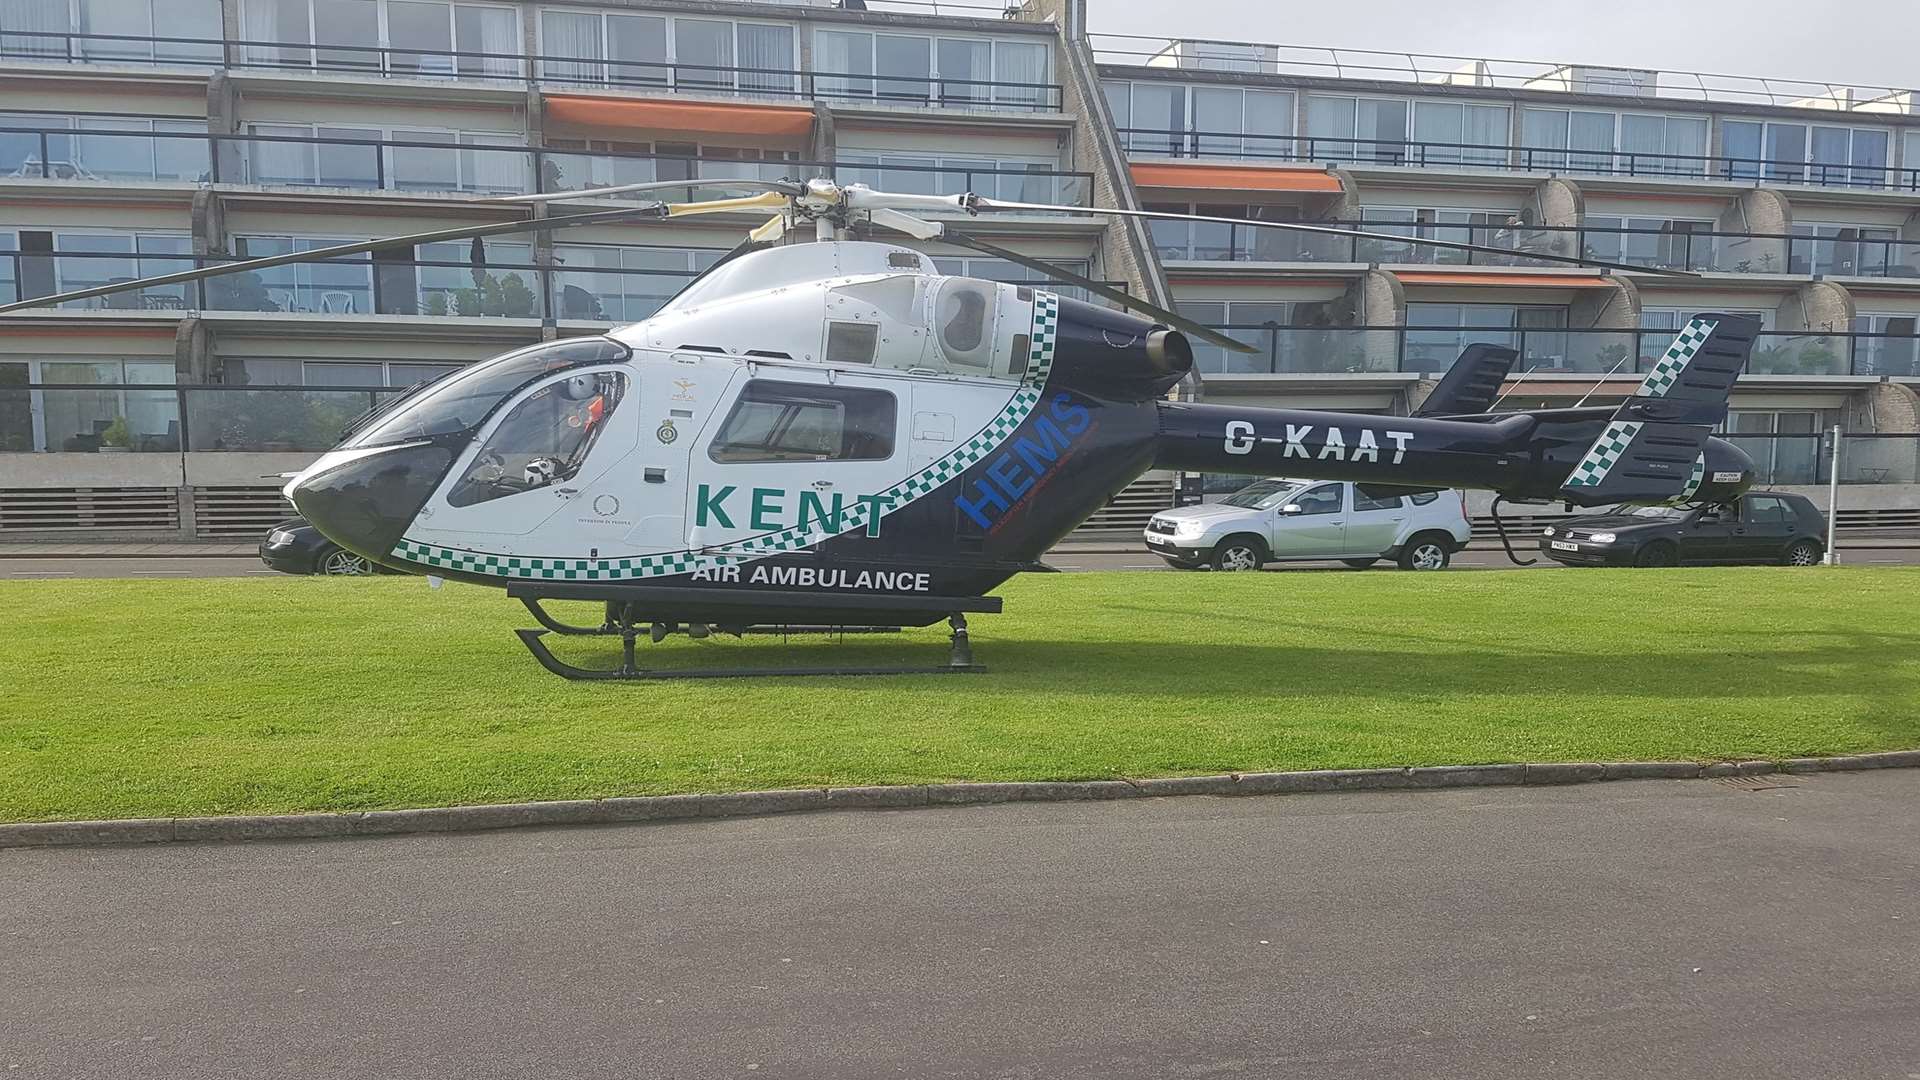 The air ambulance has been called. Pic: Steve Golding